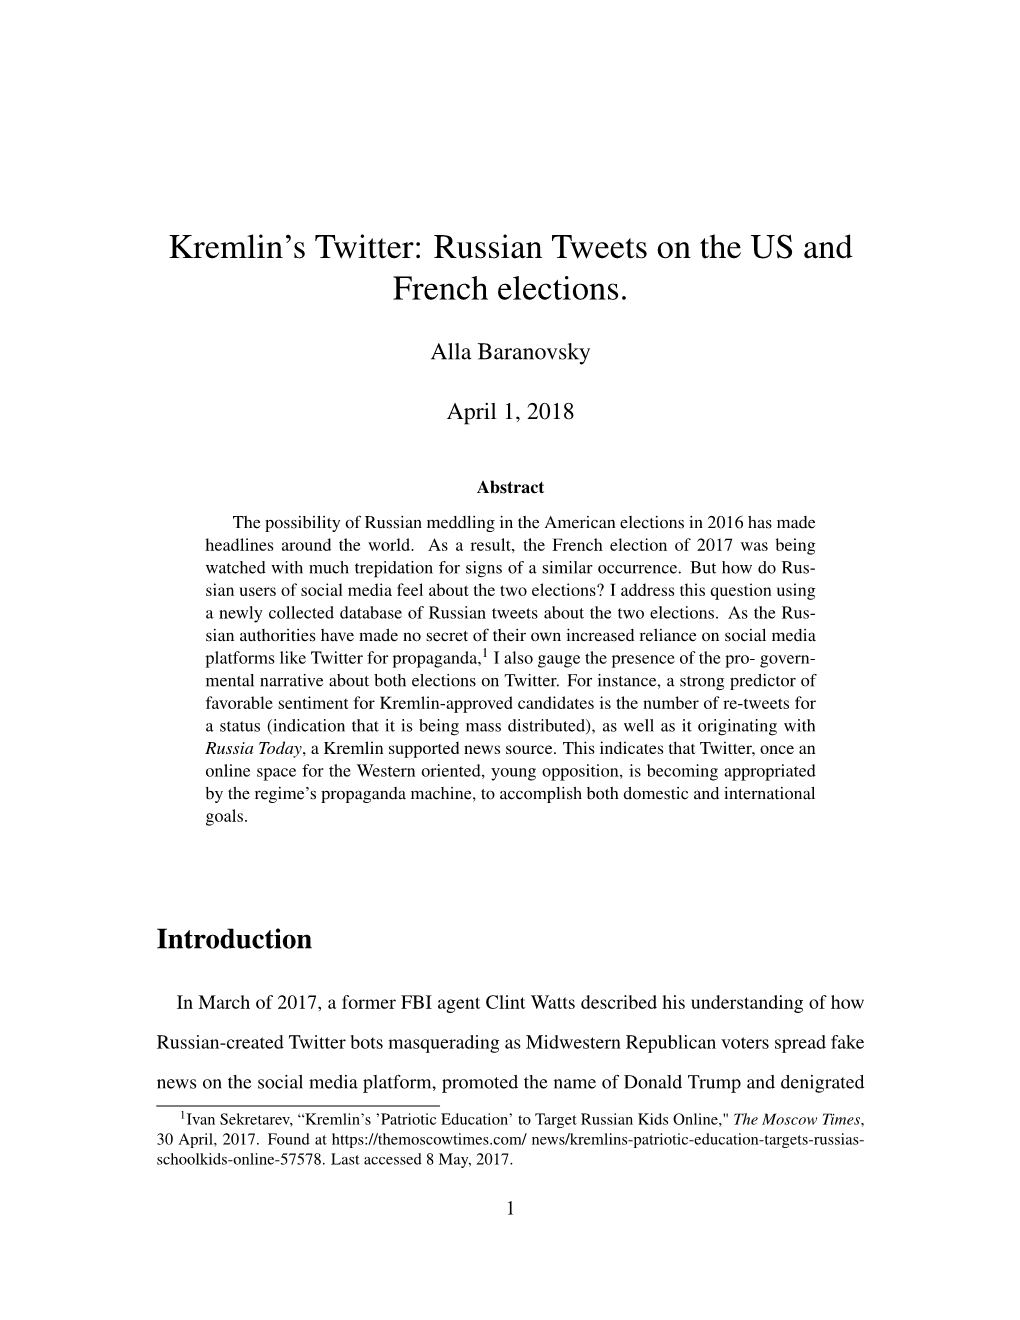 Kremlin's Twitter: Russian Tweets on the US and French Elections